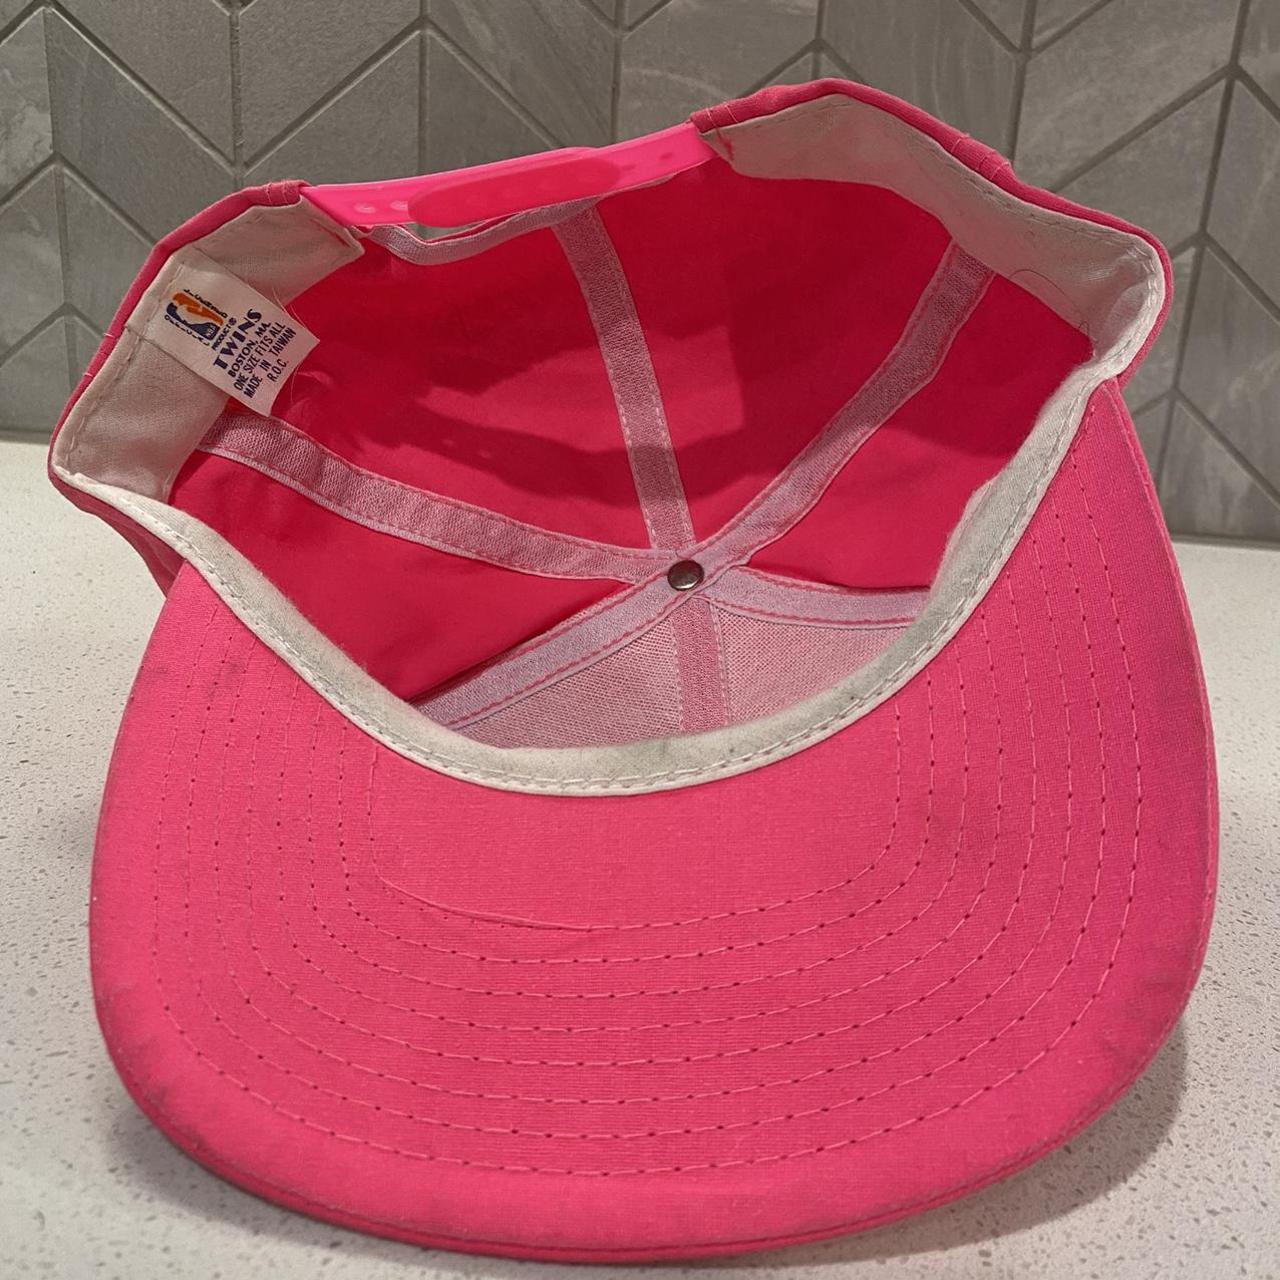 NBA Men's Pink and Red Hat (3)